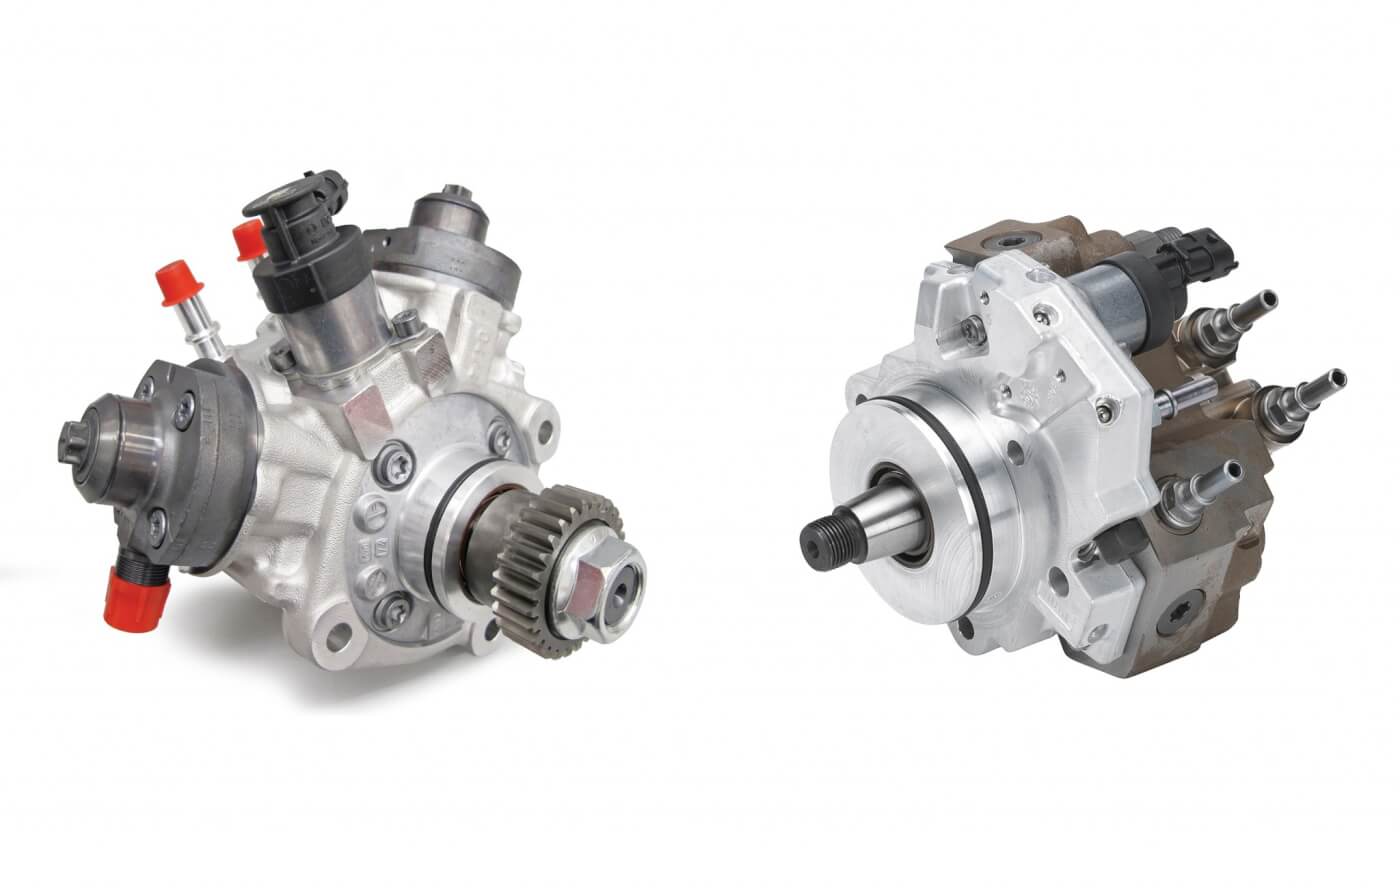 14. In terms of flow, the Exergy 10mm CP3 (right) vastly outperforms the Bosch CP4.2 (left). At a test speed of 3,000 rpm and 180 MPa (26,000 psi) of rail pressure, the 10mm Exergy CP3 flows 54 percent more fuel than the stock CP4.2. And because Exergy’s pumps don’t fall off after 3,000 rpm like the factory CP4.2 does, the Exergy pump flows an impressive 72 percent more volume at 3,500 rpm.